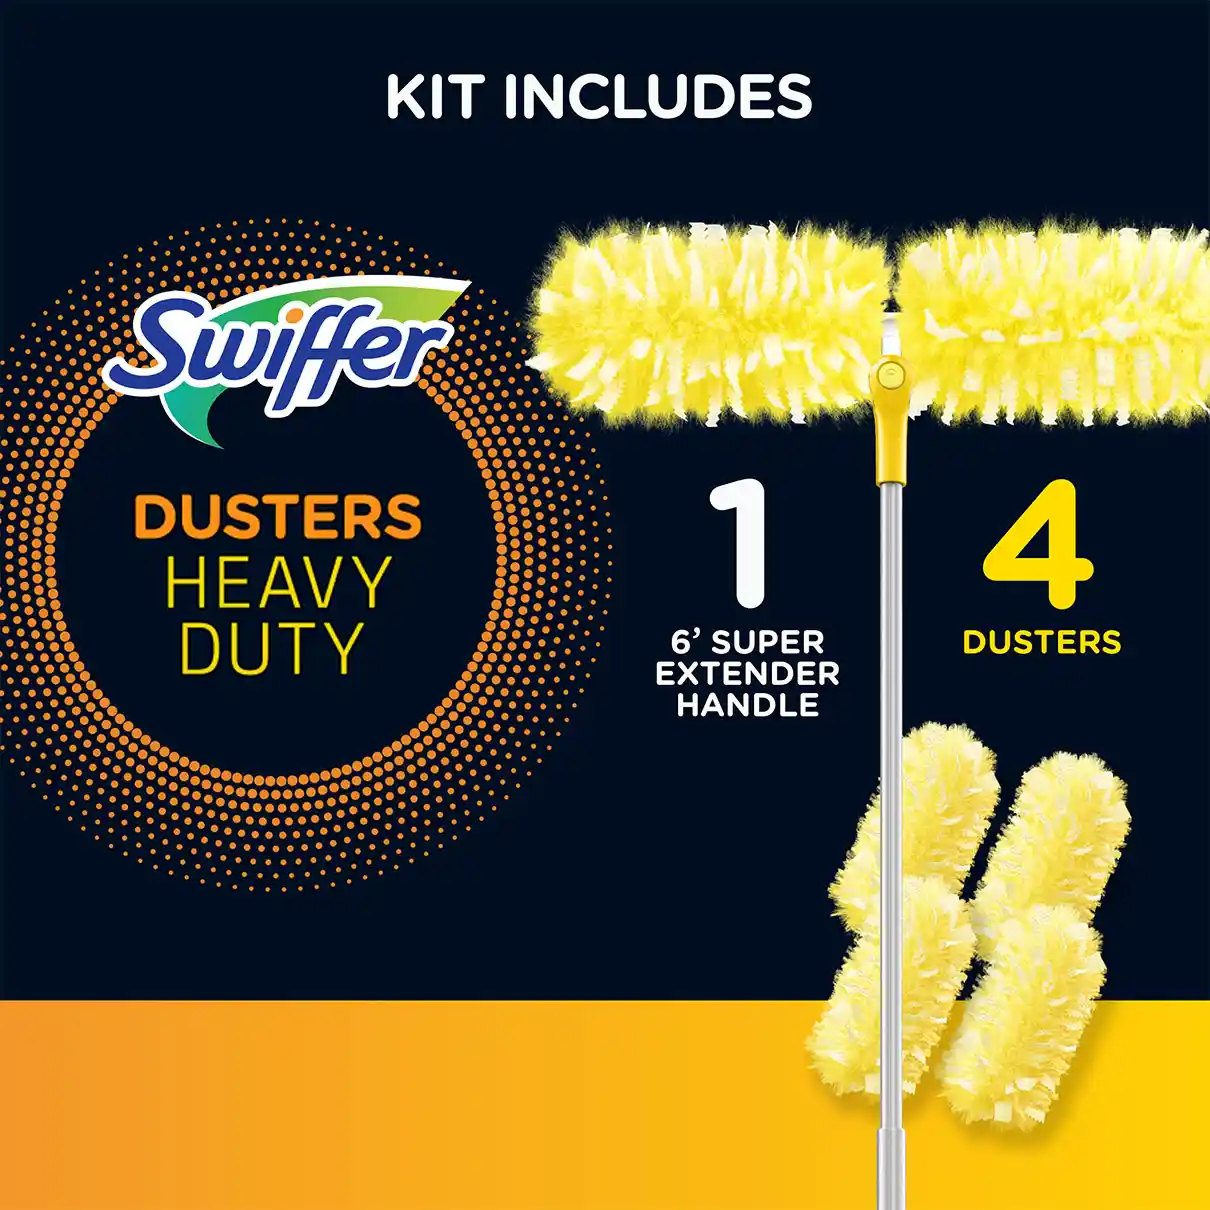 Damp Duster, Dust Cleaning Sponge Baseboard Cleaner Duster Sponge Tool,  Reusable Dusters for Cleaning Blinds, Vents, Ceiling Fan, and Cobweb 